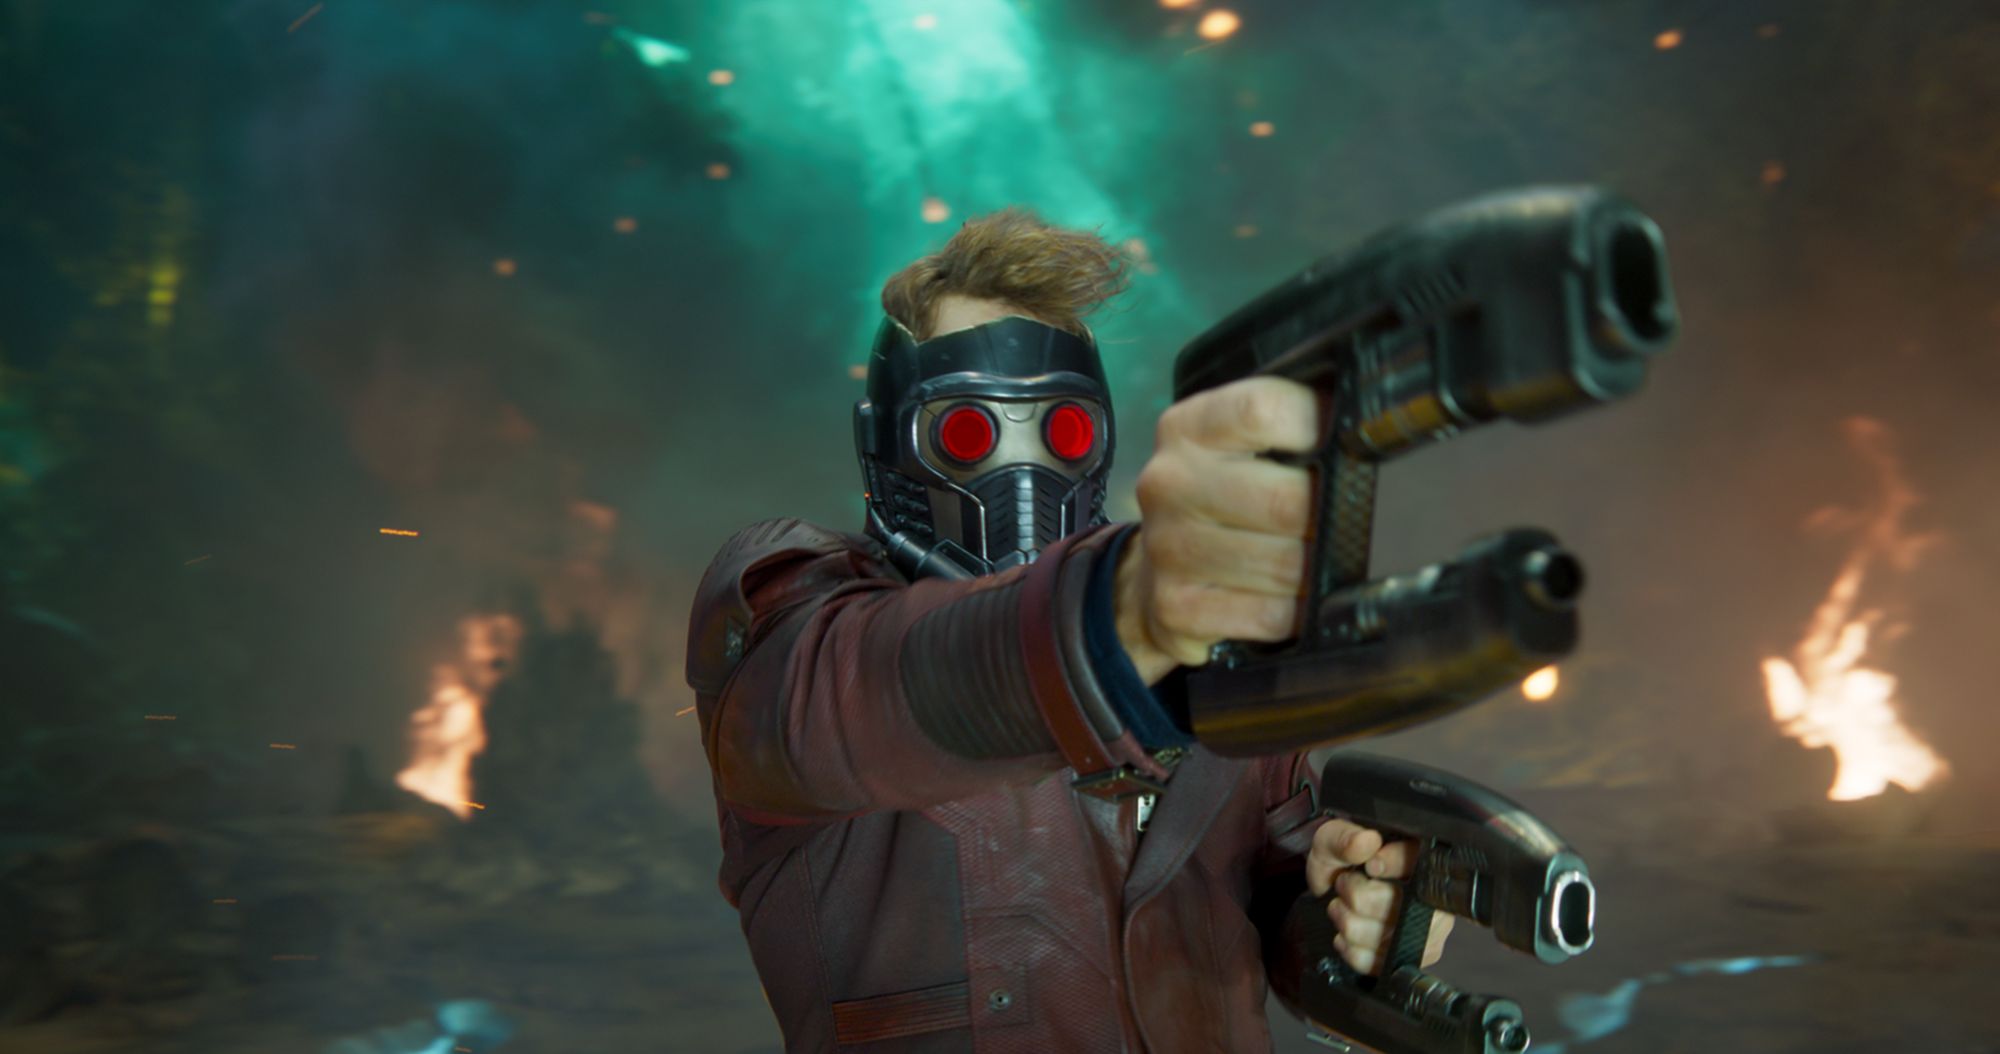 Peter Quill/Star-Lord (Chris Pratt), his helmet down, points his blasters as his father.